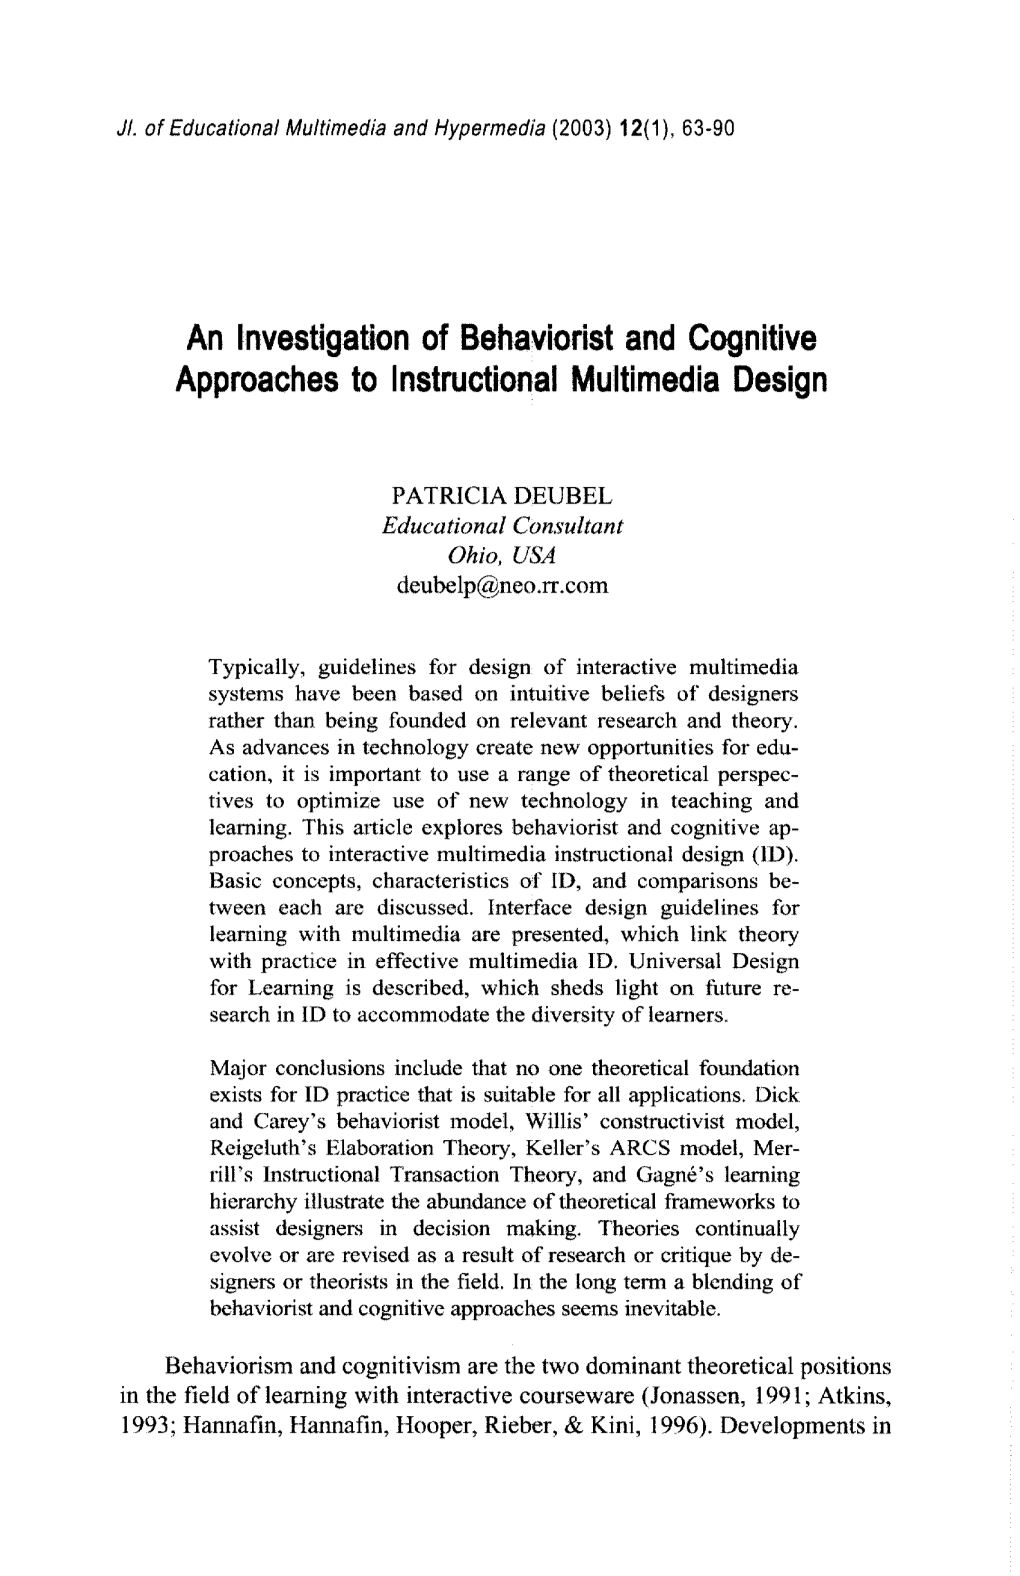 An Investigation of Behaviorist and Cognitive Approaches to Instructional Multimedia Design